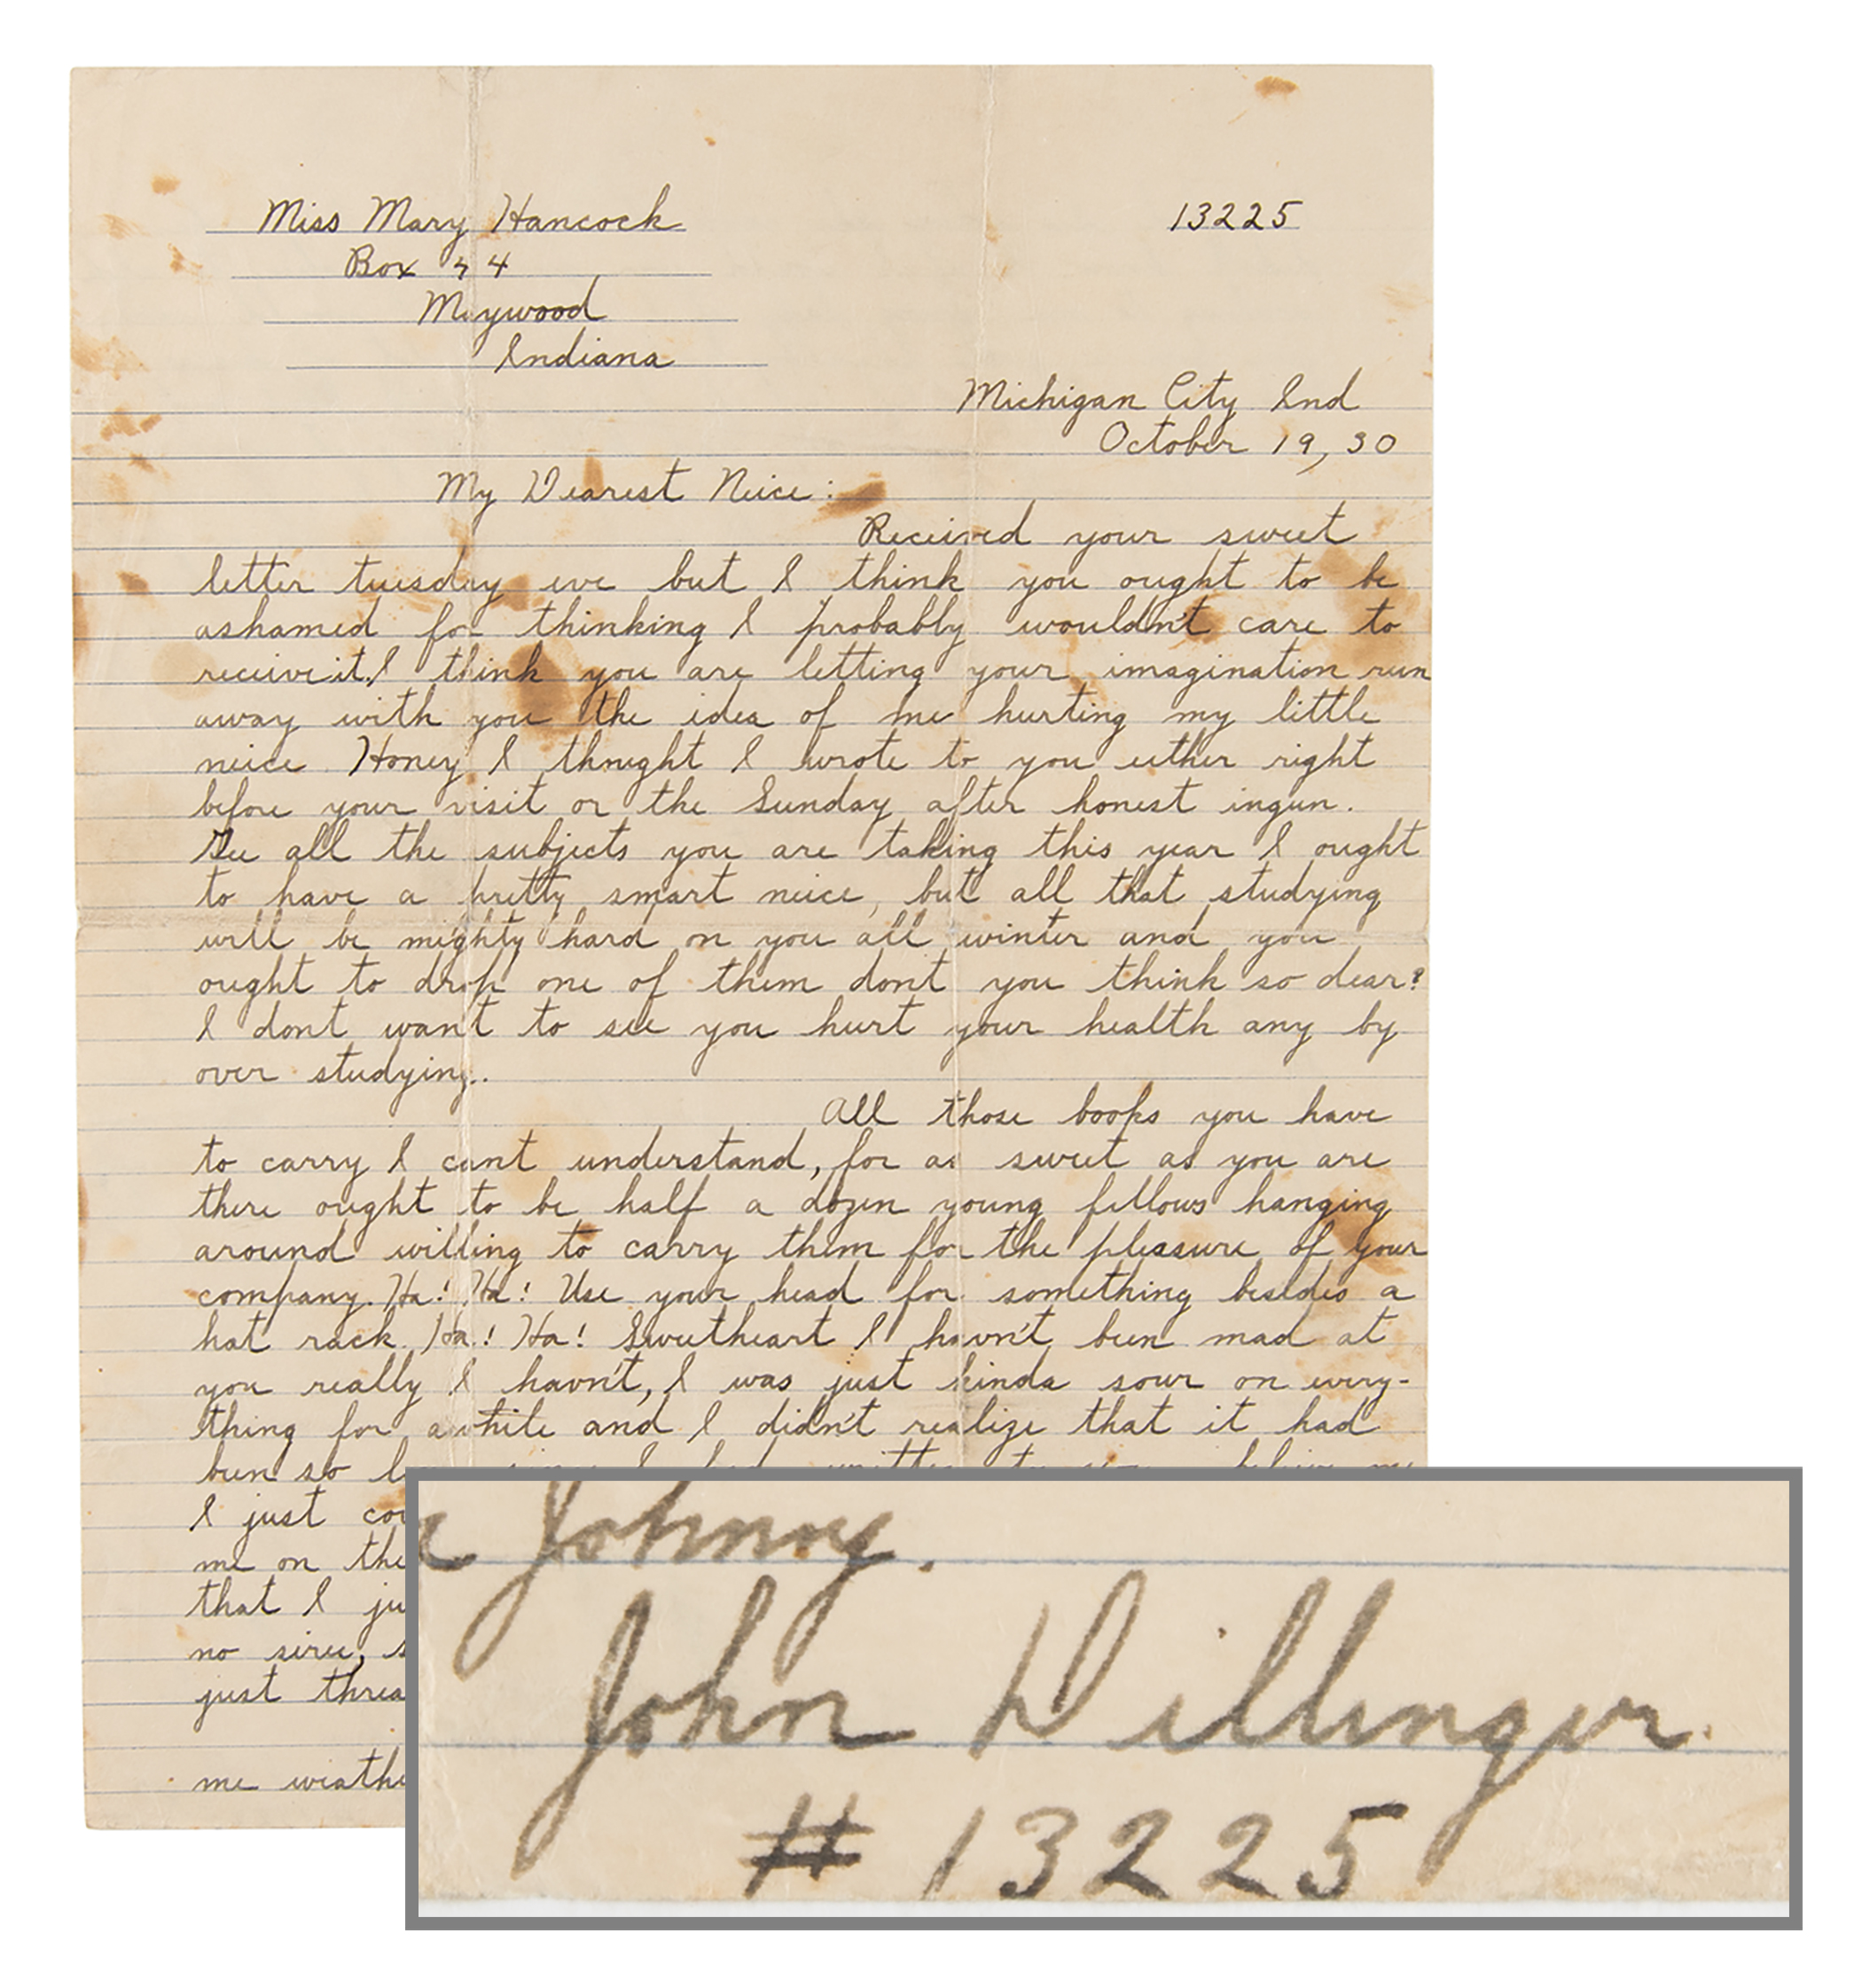 Lot #6050 John Dillinger Autograph Letter Signed from Prison: I am broke right now but just you wait untill I get out